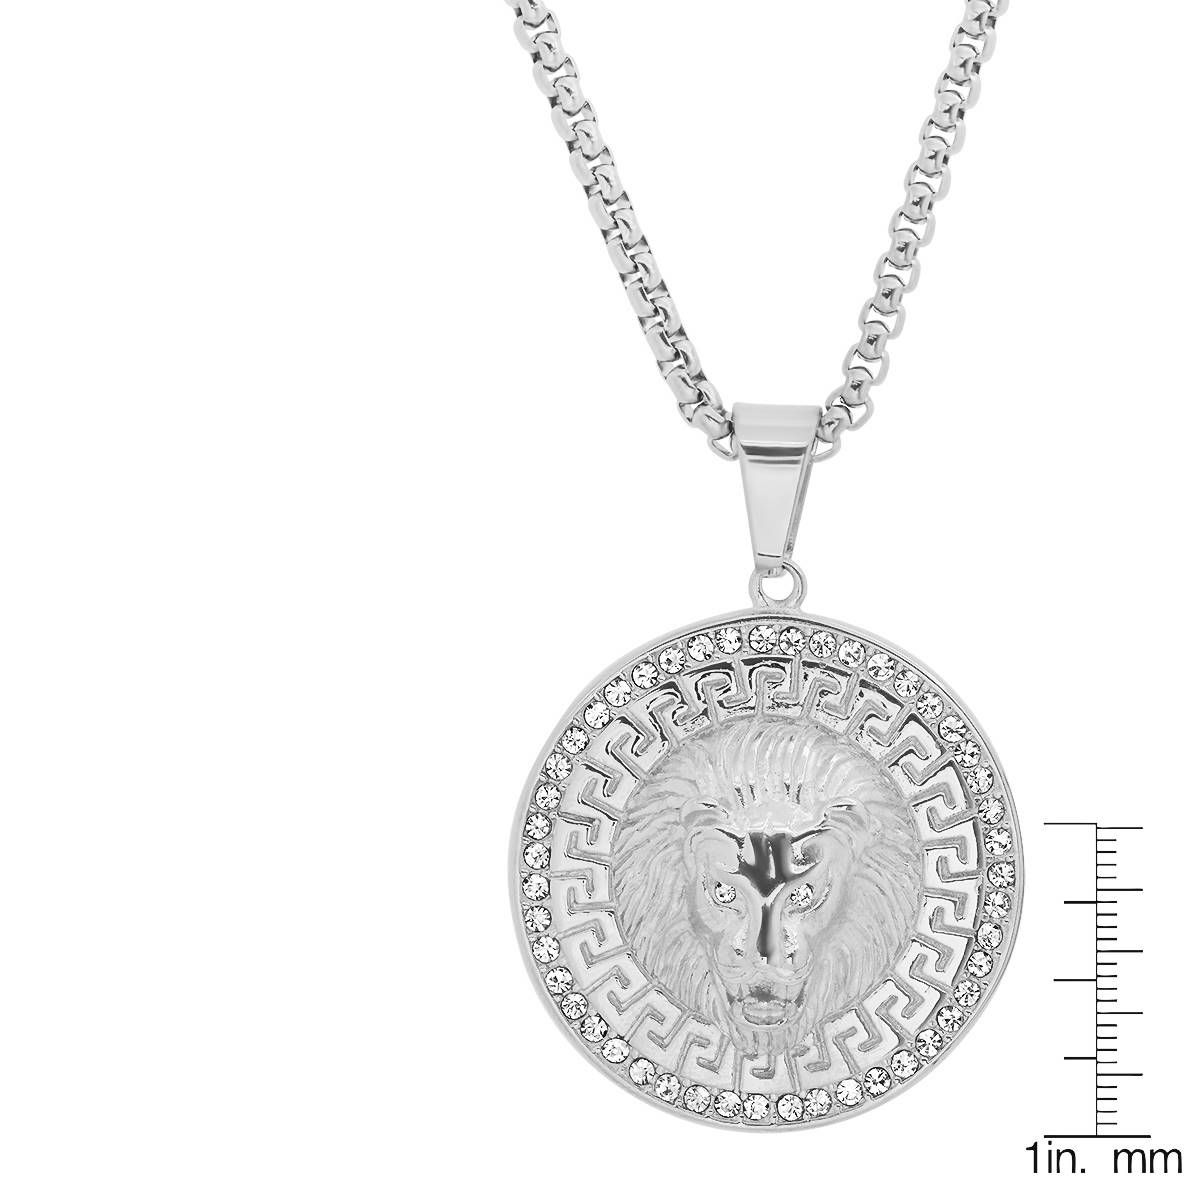 Mens Steeltime Lion And Simulated Diamond Pendant Necklace